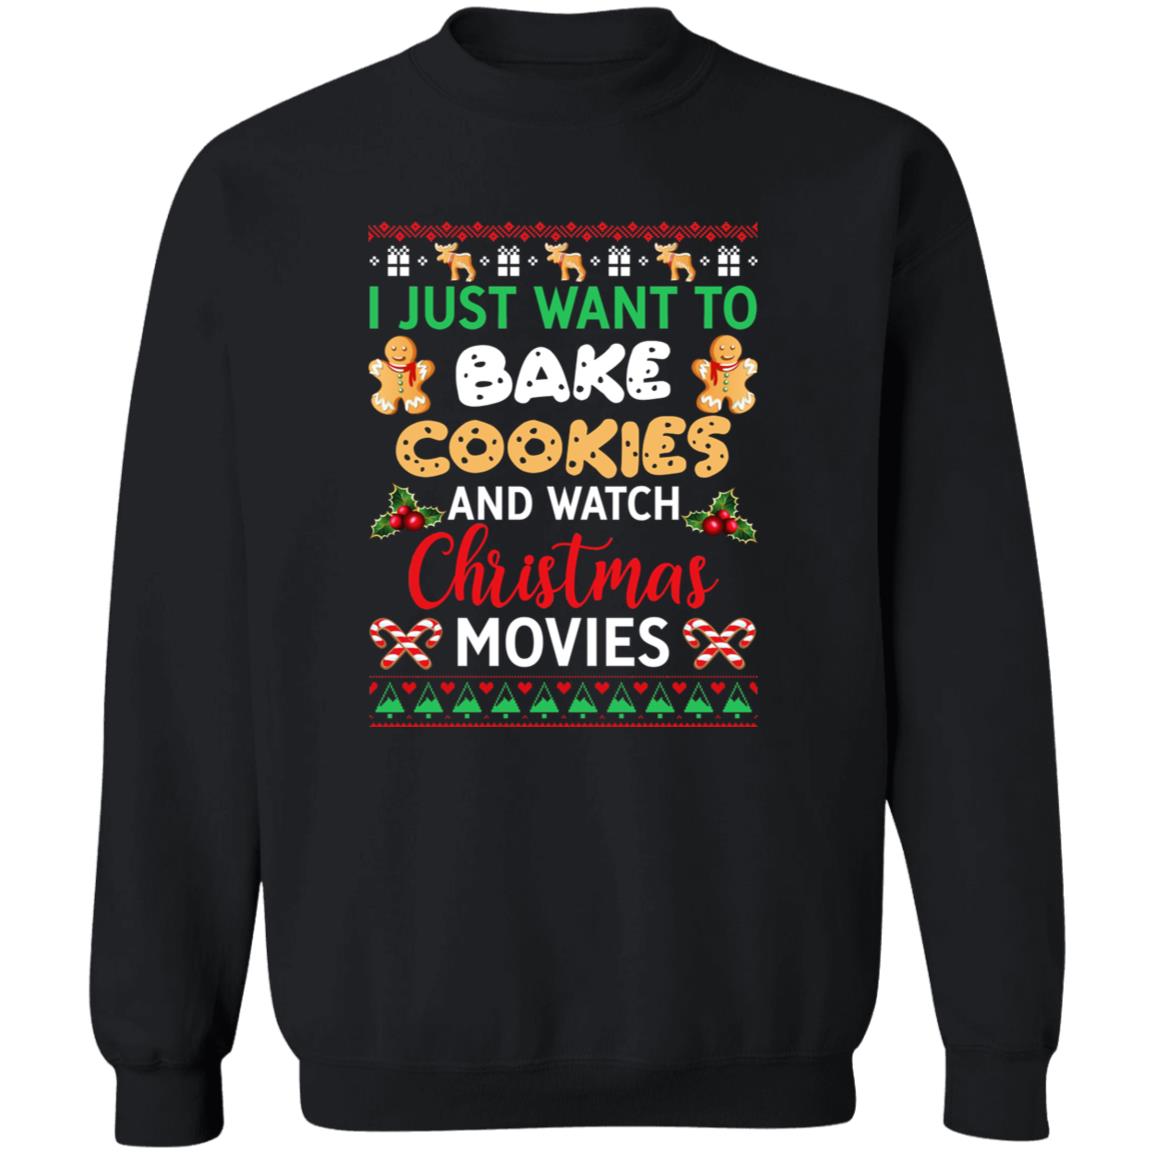 Cookies and movies Christmas Unisex Sweatshirt Ugly sweater Black Dark Heather-Family-Gift-Planet